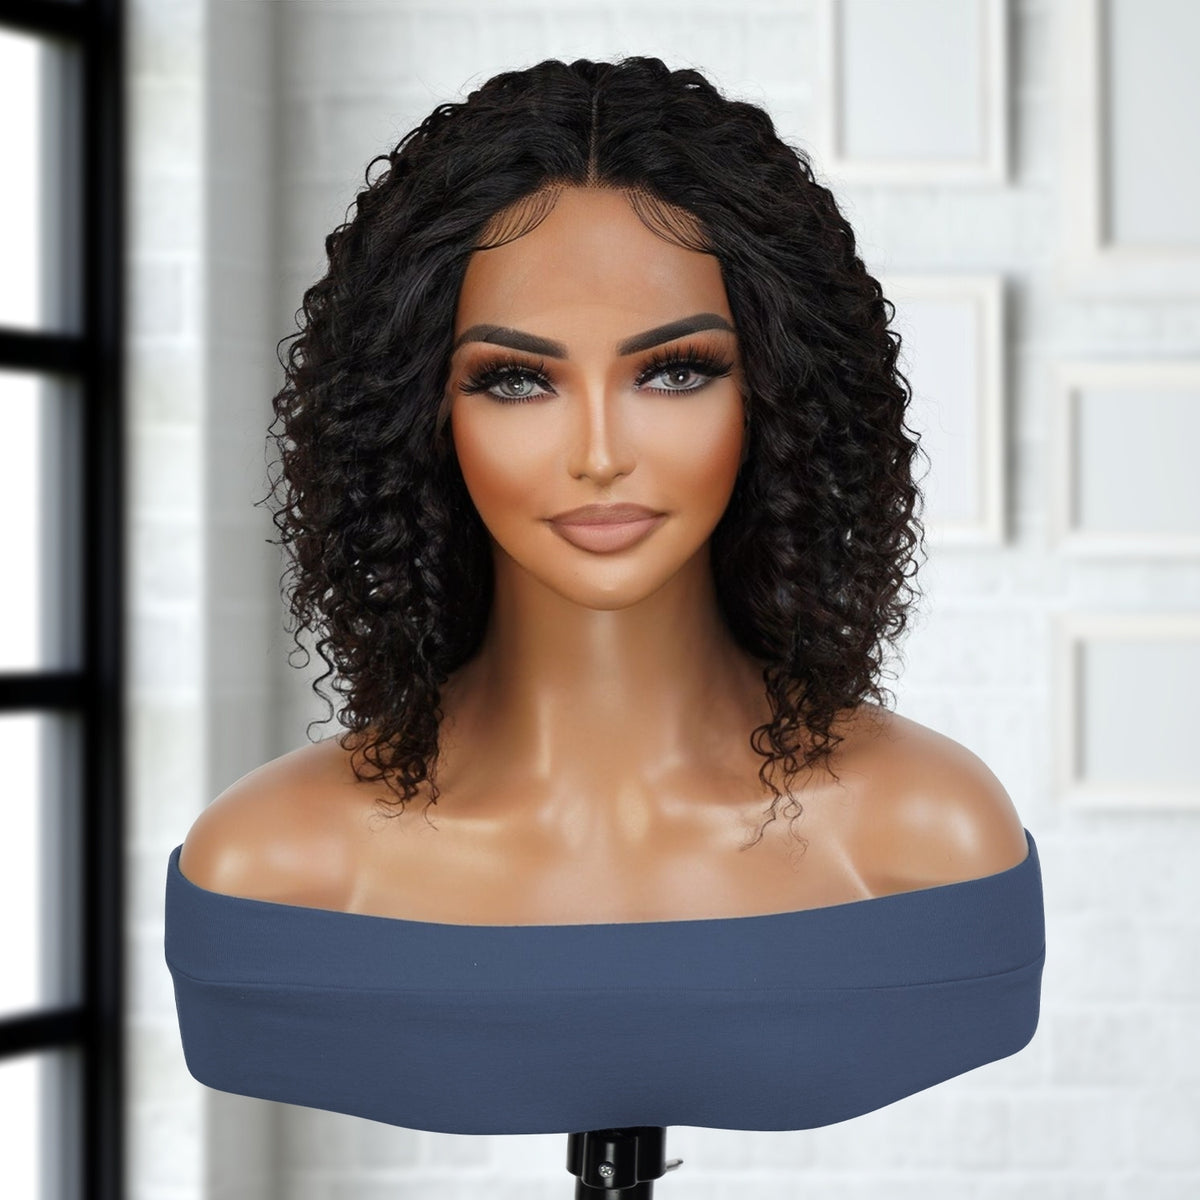 T part lace wig makes a versatile hair fashion without any tension and worries about your natural hair, Classical bob hairstyle with natural color, Trending tiktok viral wig, Easy to Wear and Go, Unprocessed Virgin Human hair, You can dye or bleach and perm, 150 Density hair with Pre-Plucked Hairline, Real & natural looking human hair lace wig, Perfect hairstyle for all season